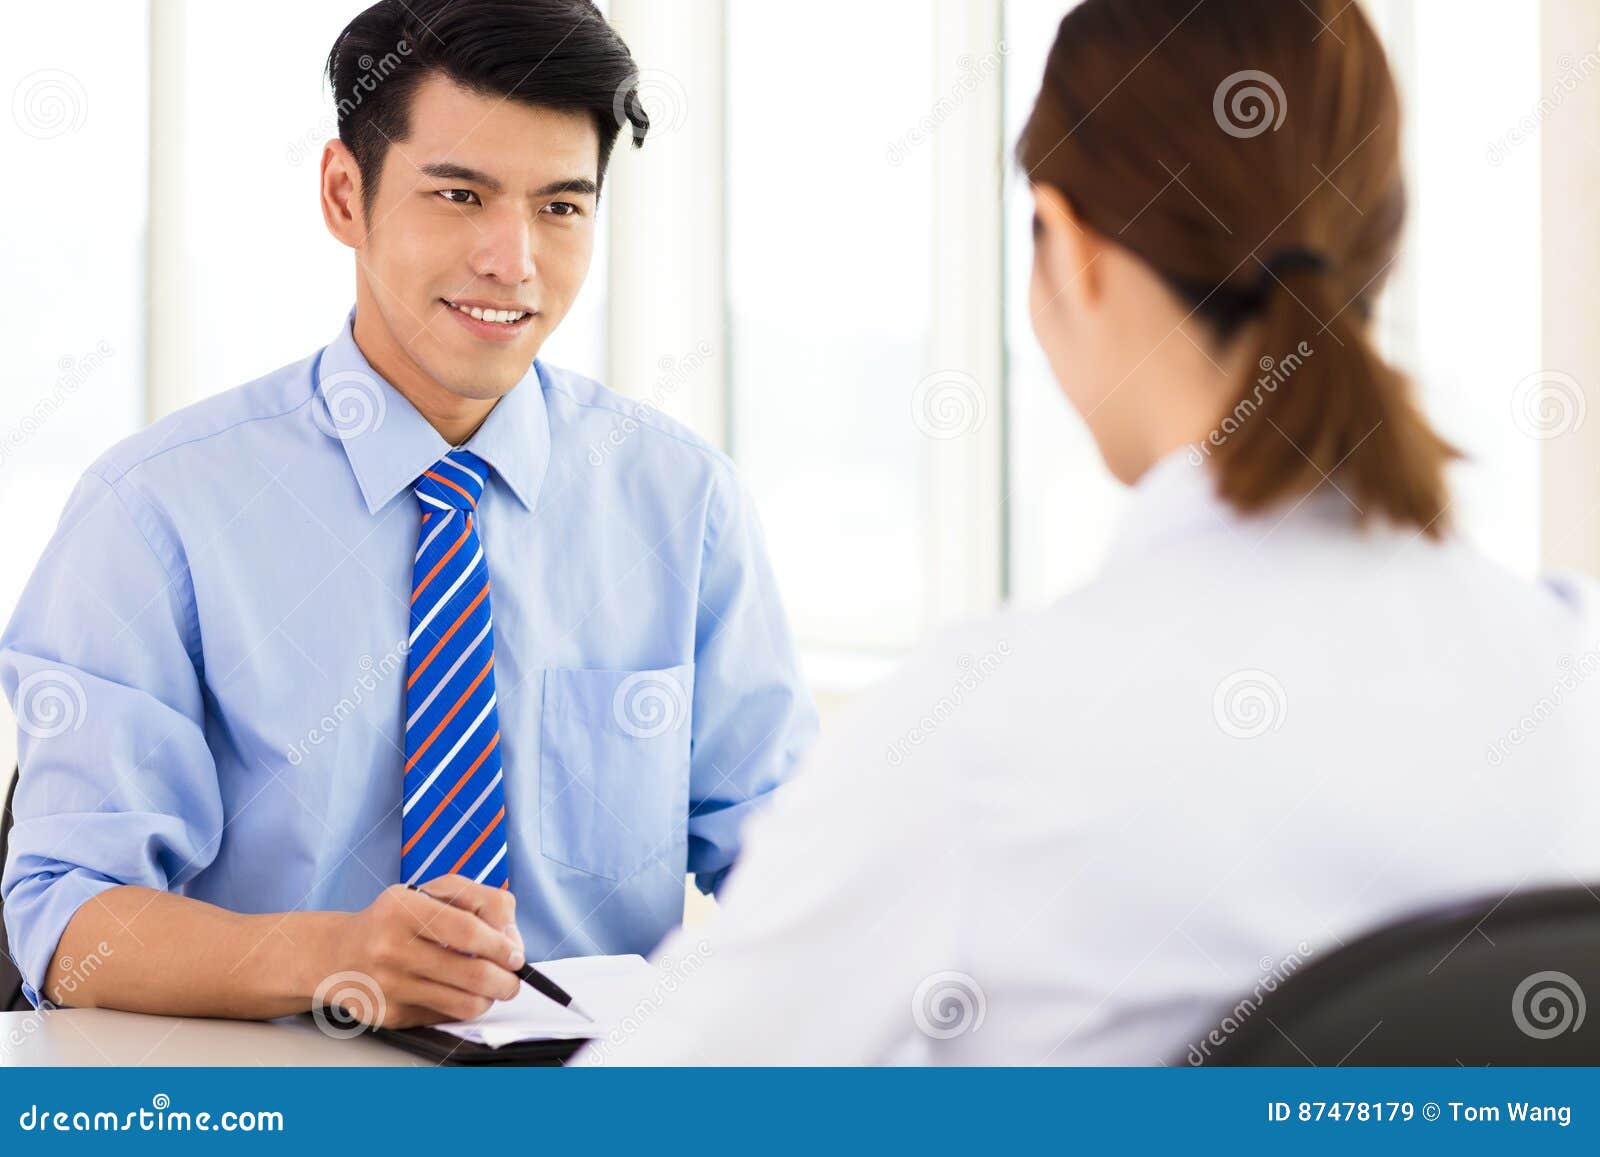 recruiter checking the candidate during job interview